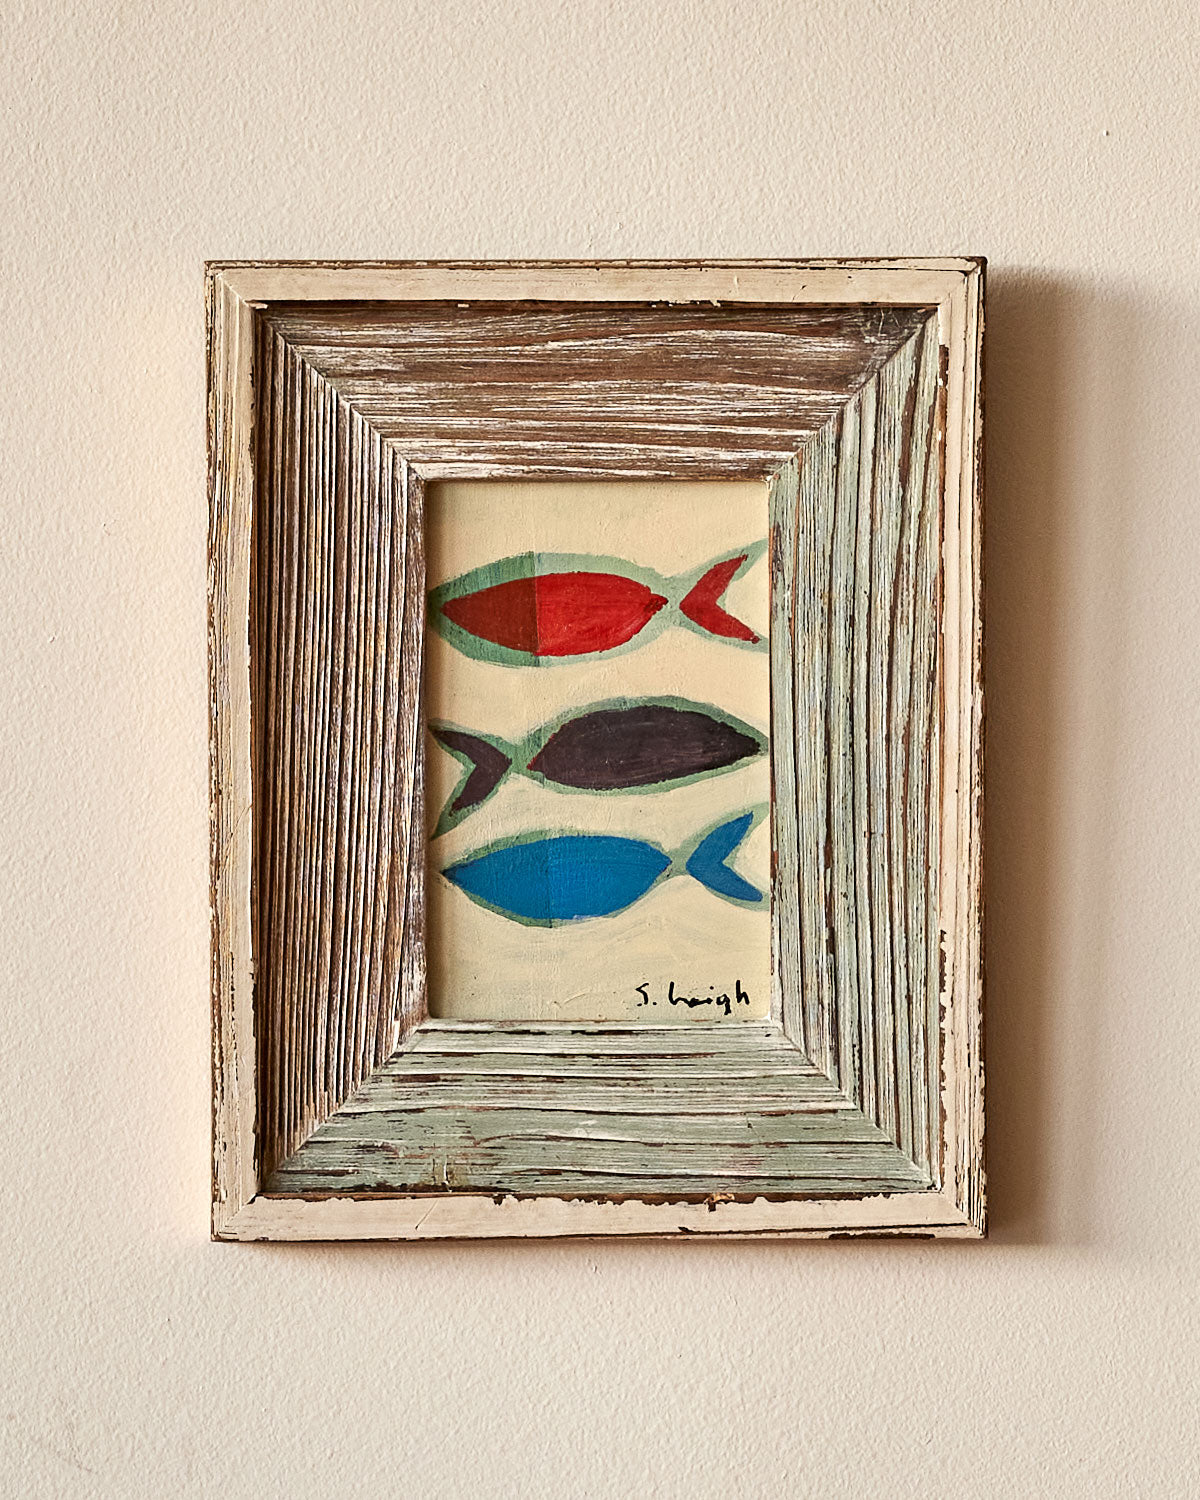 "Three Fishes" by Stephen Heigh